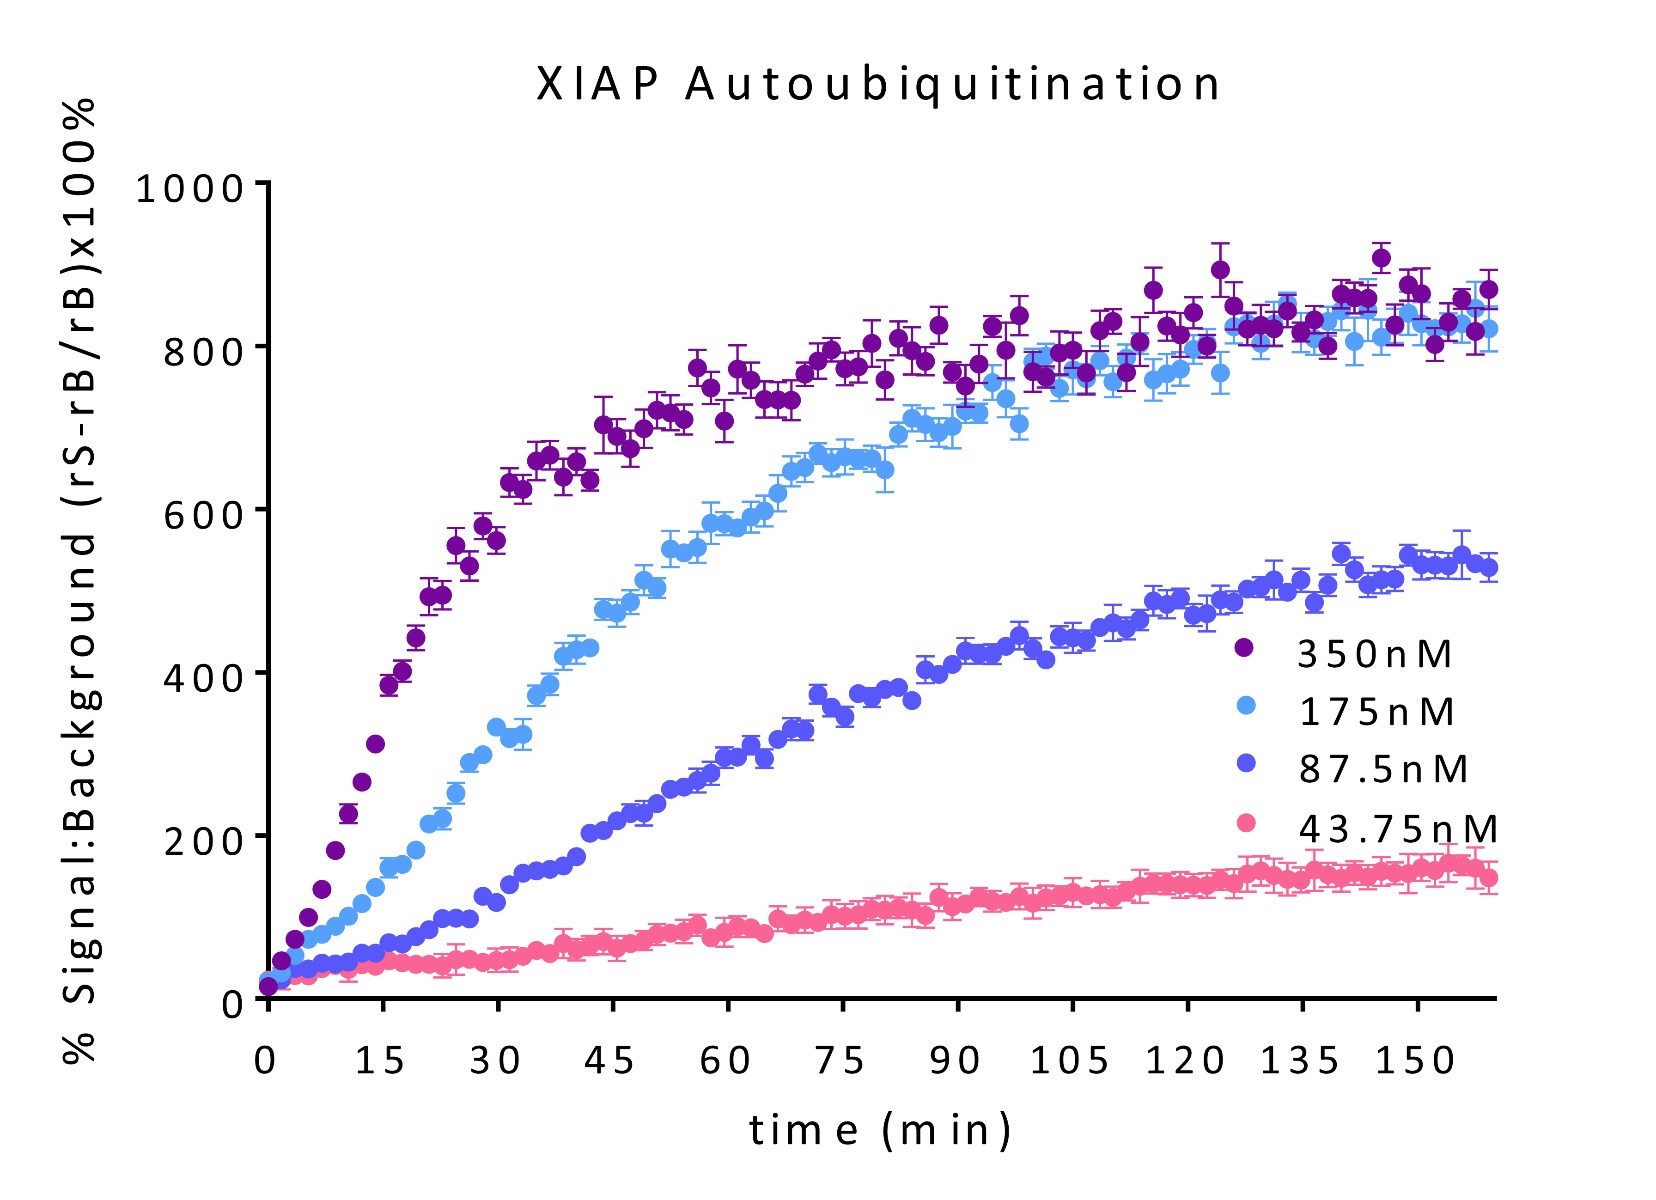 % Signal to Background of Continuous Real-Time TR-FRET XIAP titration (autoubiquitination): Serial dilutions of NEDD4 from 350nM to 43.75nM mixed with UBA1, UBE2D2, and, TRF-Ub mix. Reaction was initiated with addition of Mg-ATP.,Estimated Z-primes of Continuous Real-Time TR-FRET XIAP titration (autoubiquitination): Serial dilutions of XIAP from 350nm to 43.75nM mixed with UBA1, UBE2D2, and TRF-Ub mix. Reaction was initiated with addition of Mg-ATP.